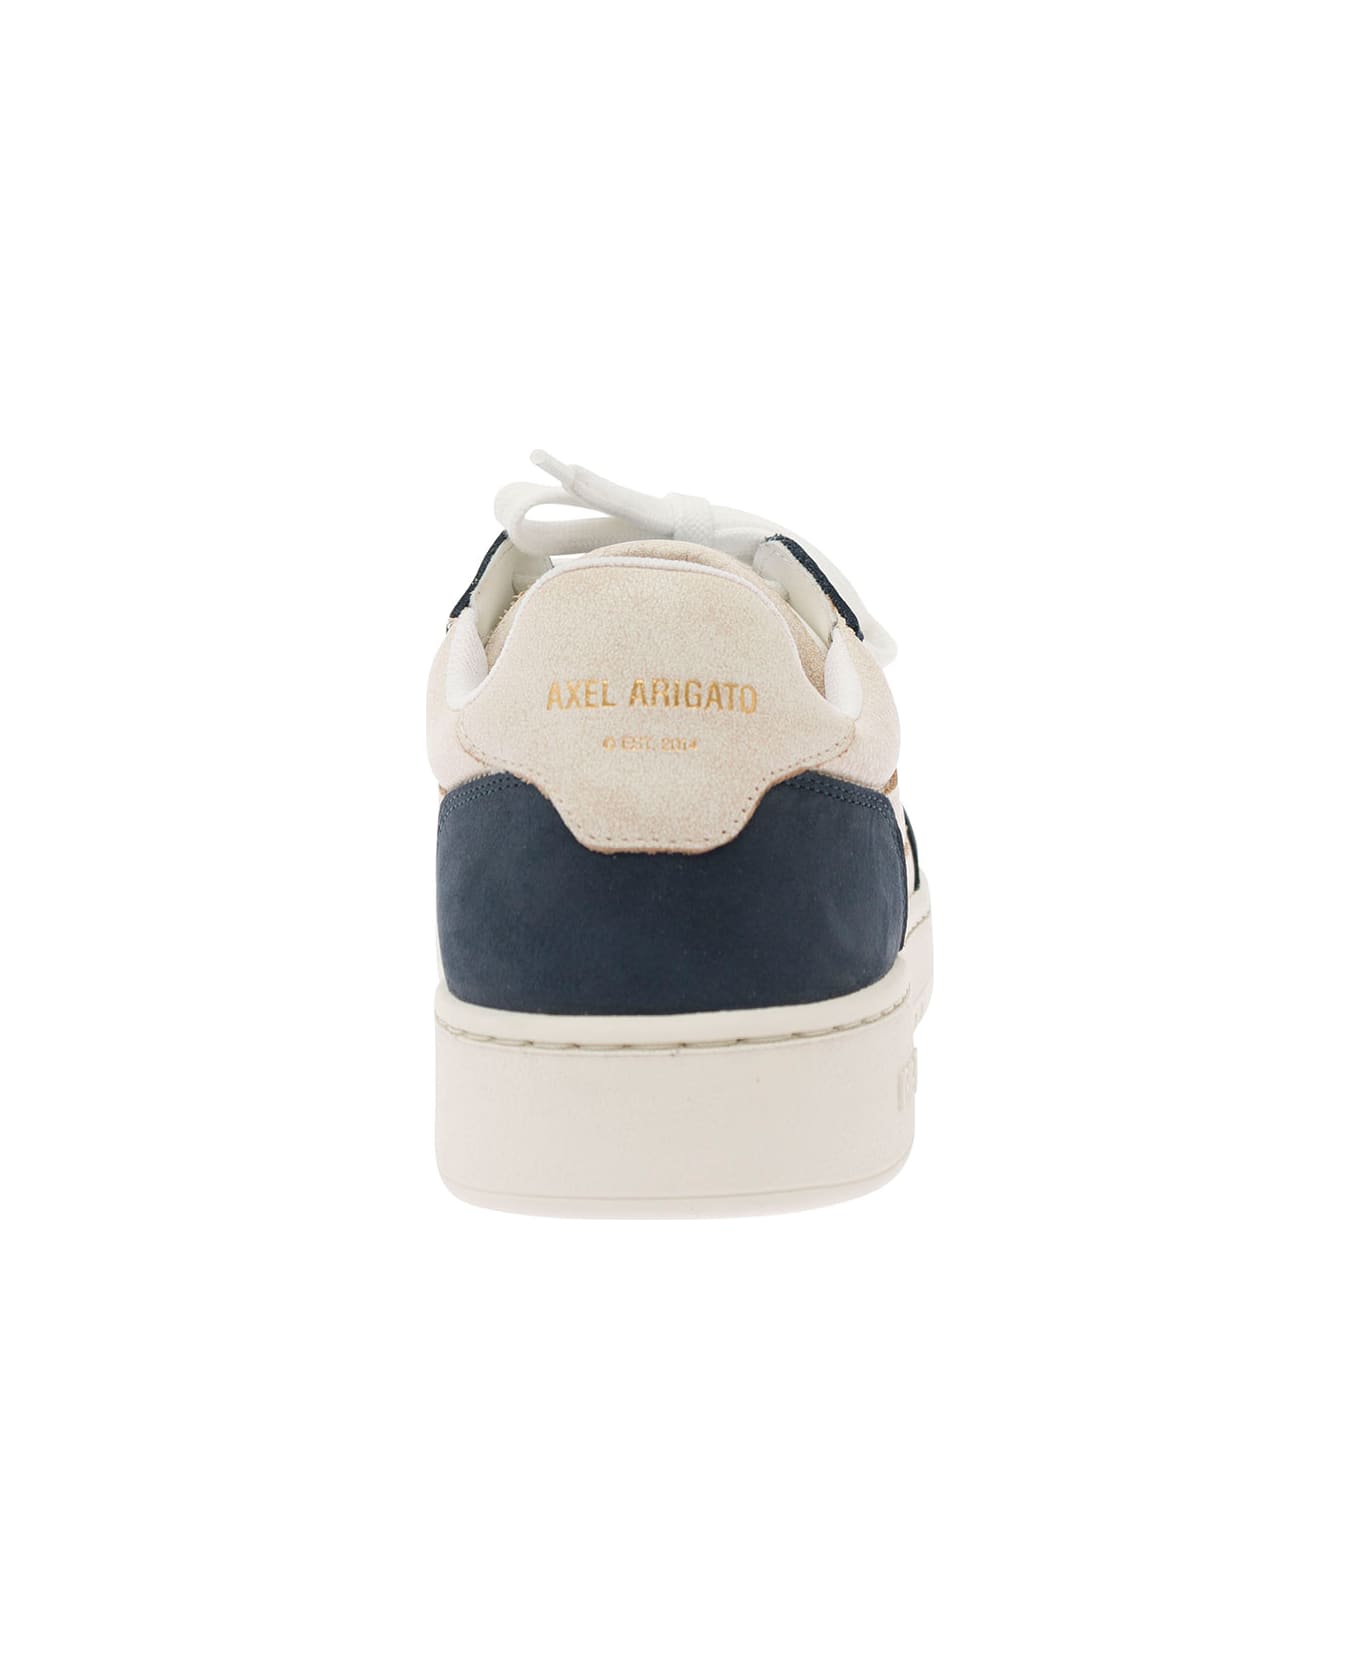 Axel Arigato 'dice Lo' Blue And White Two-tone Sneakers In Calf Leather Man - White スニーカー